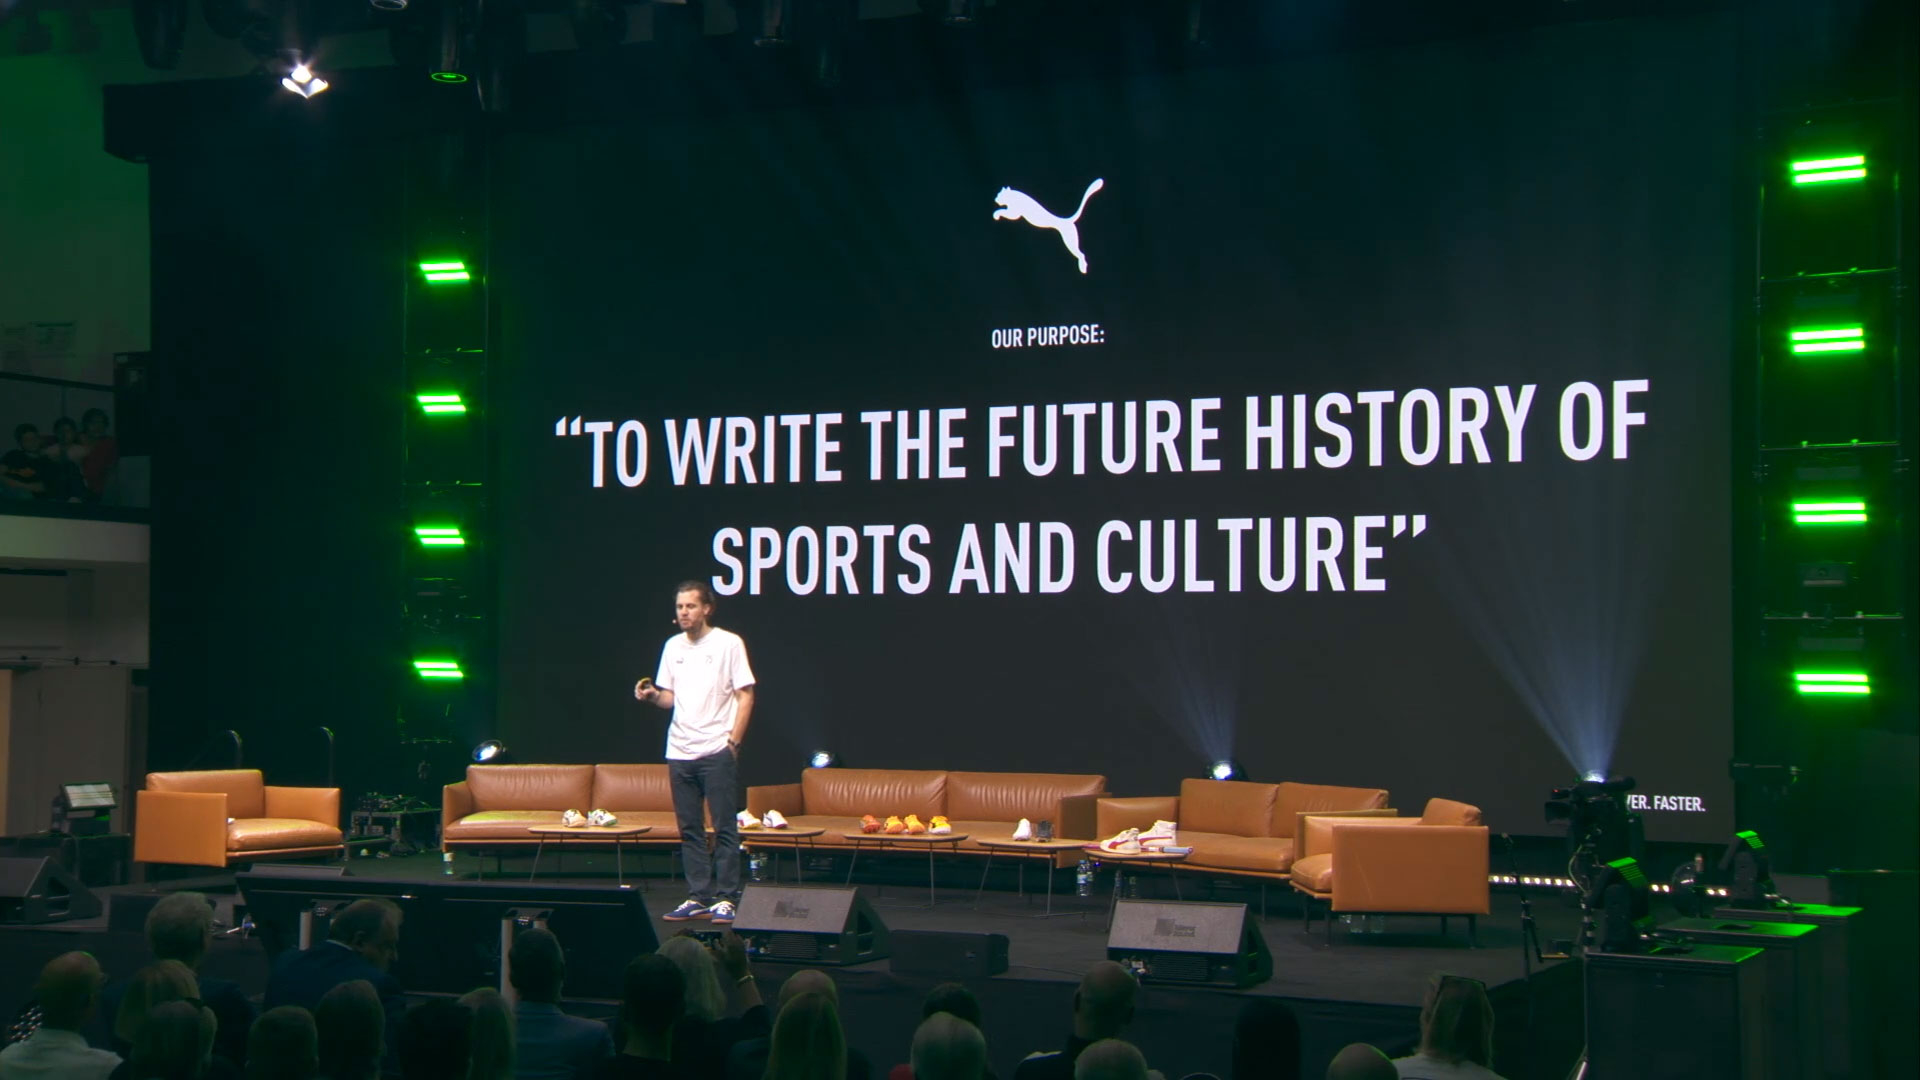 Sports company PUMA and several of its world-class ambassadors shared some of their most memorable moments of sports history of the past 75 years to celebrate the company’s anniversary as the fastest sports brand in the world.